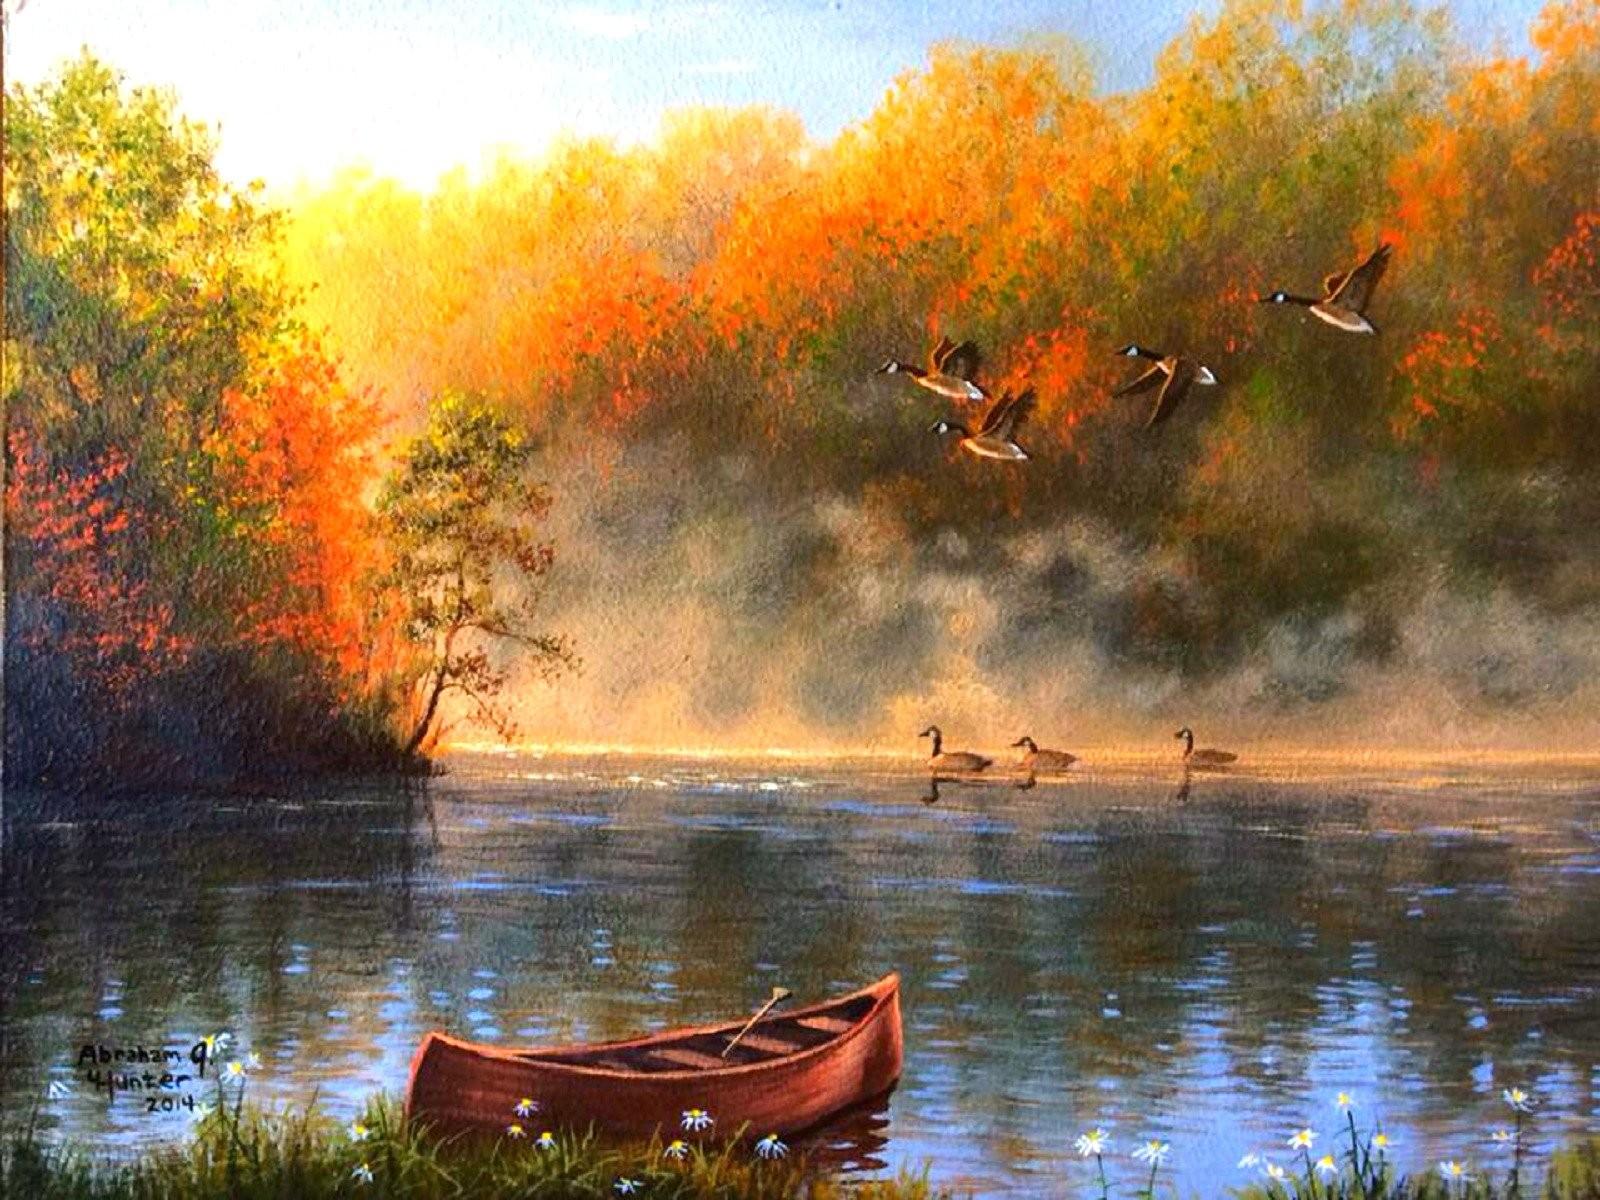 Fantasy Wallpaper, Landscape, autumn, Tree, Sumrise, Artwork, River, Forest, Duck, Abstract HD Wallpaper, Mood Nature, Boat, full HD, Fall, R